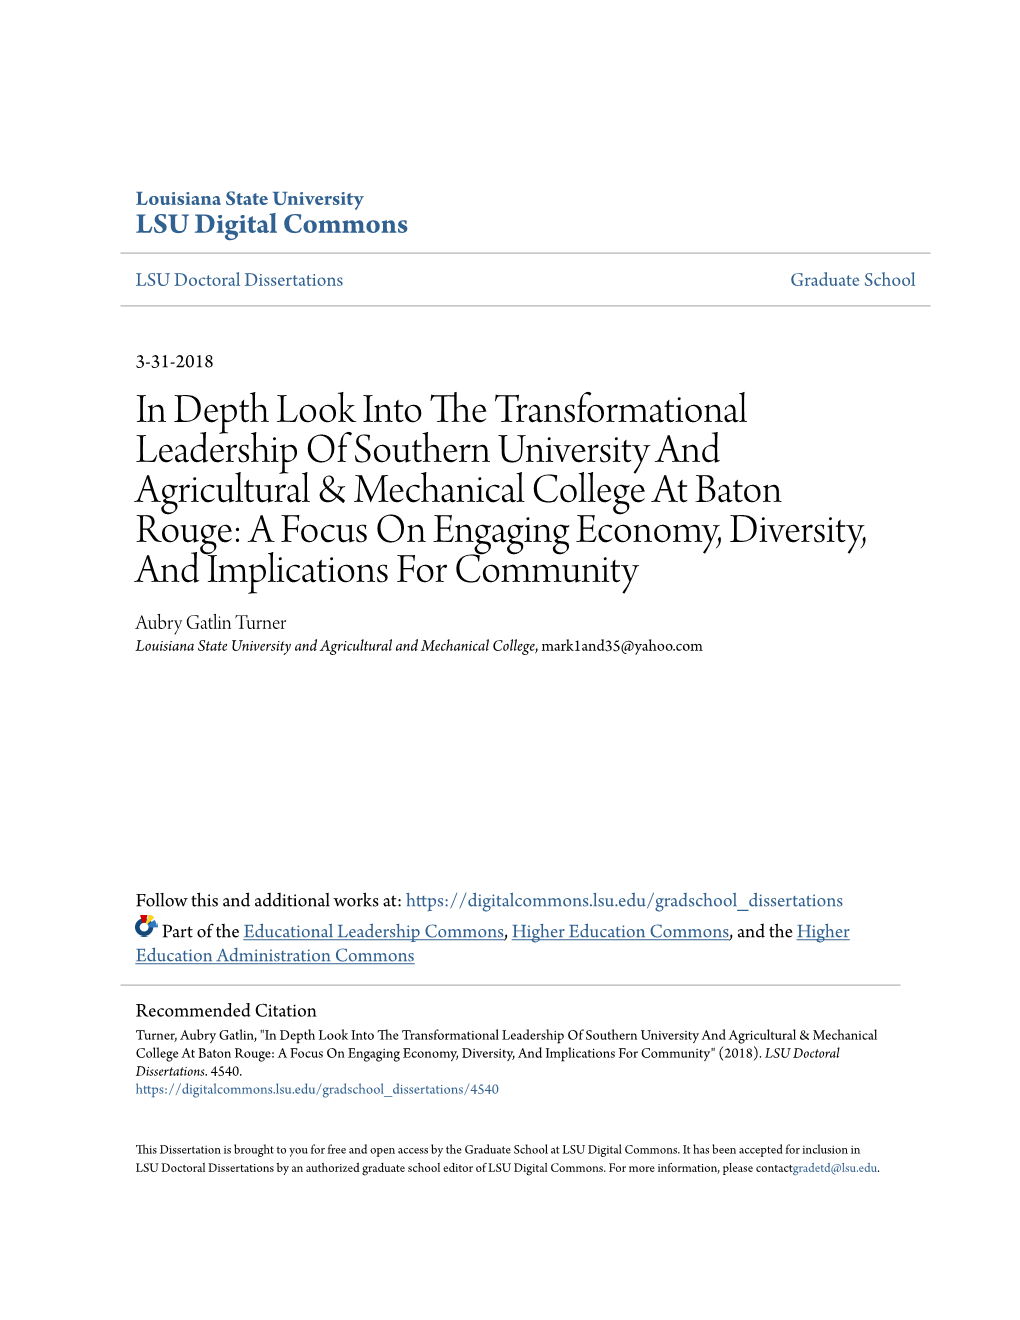 In Depth Look Into the Transformational Leadership of Southern University and Agricultural & Mechanical College at Baton